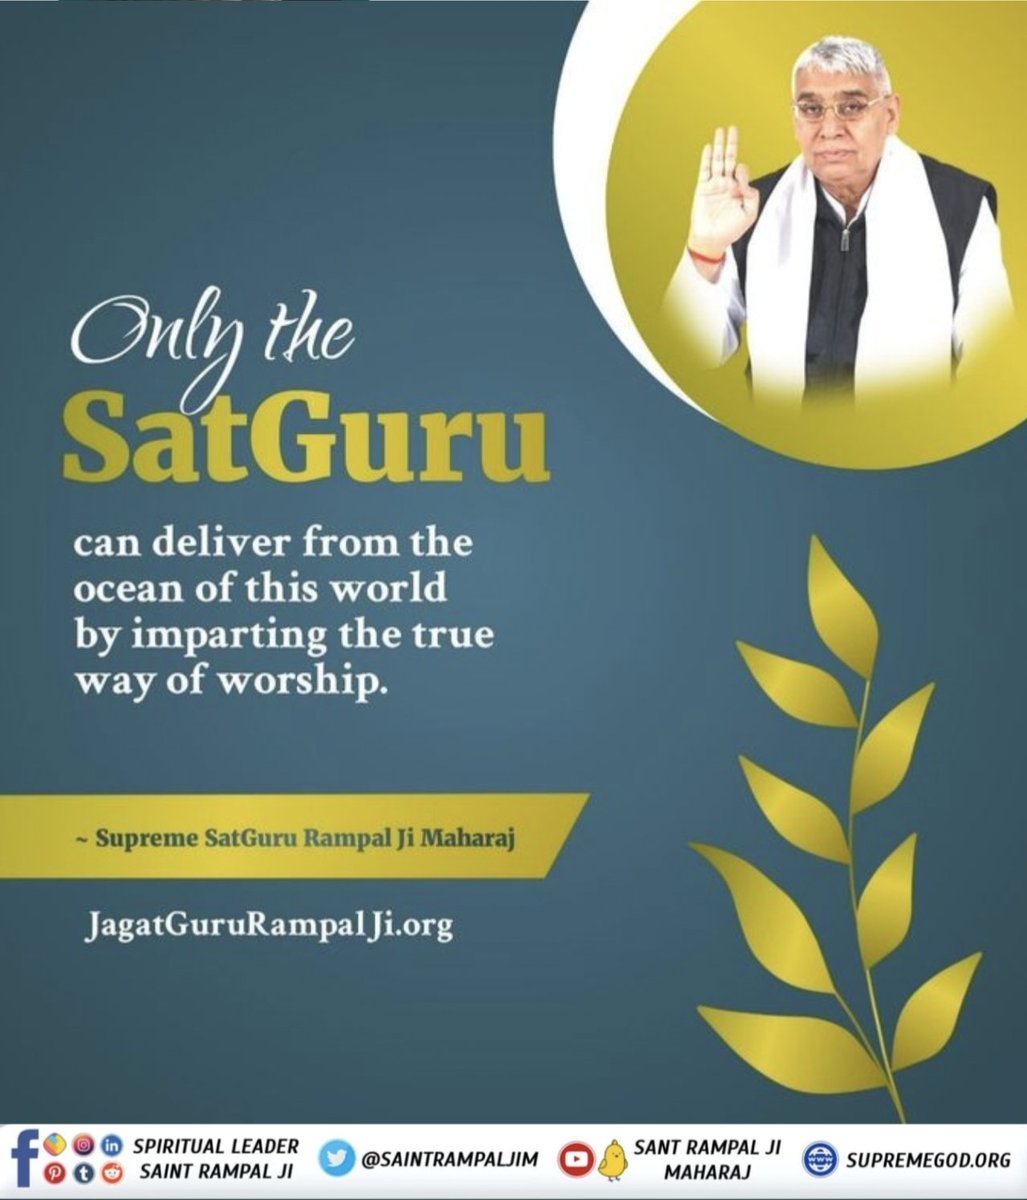 #GodNightMonday 🪴🪴 Only the SatGuru can deliver from the ocean of this world by imparting the true way of worship. 🙇🙇 Supreme SatGuru Rampal Ji Maharaj